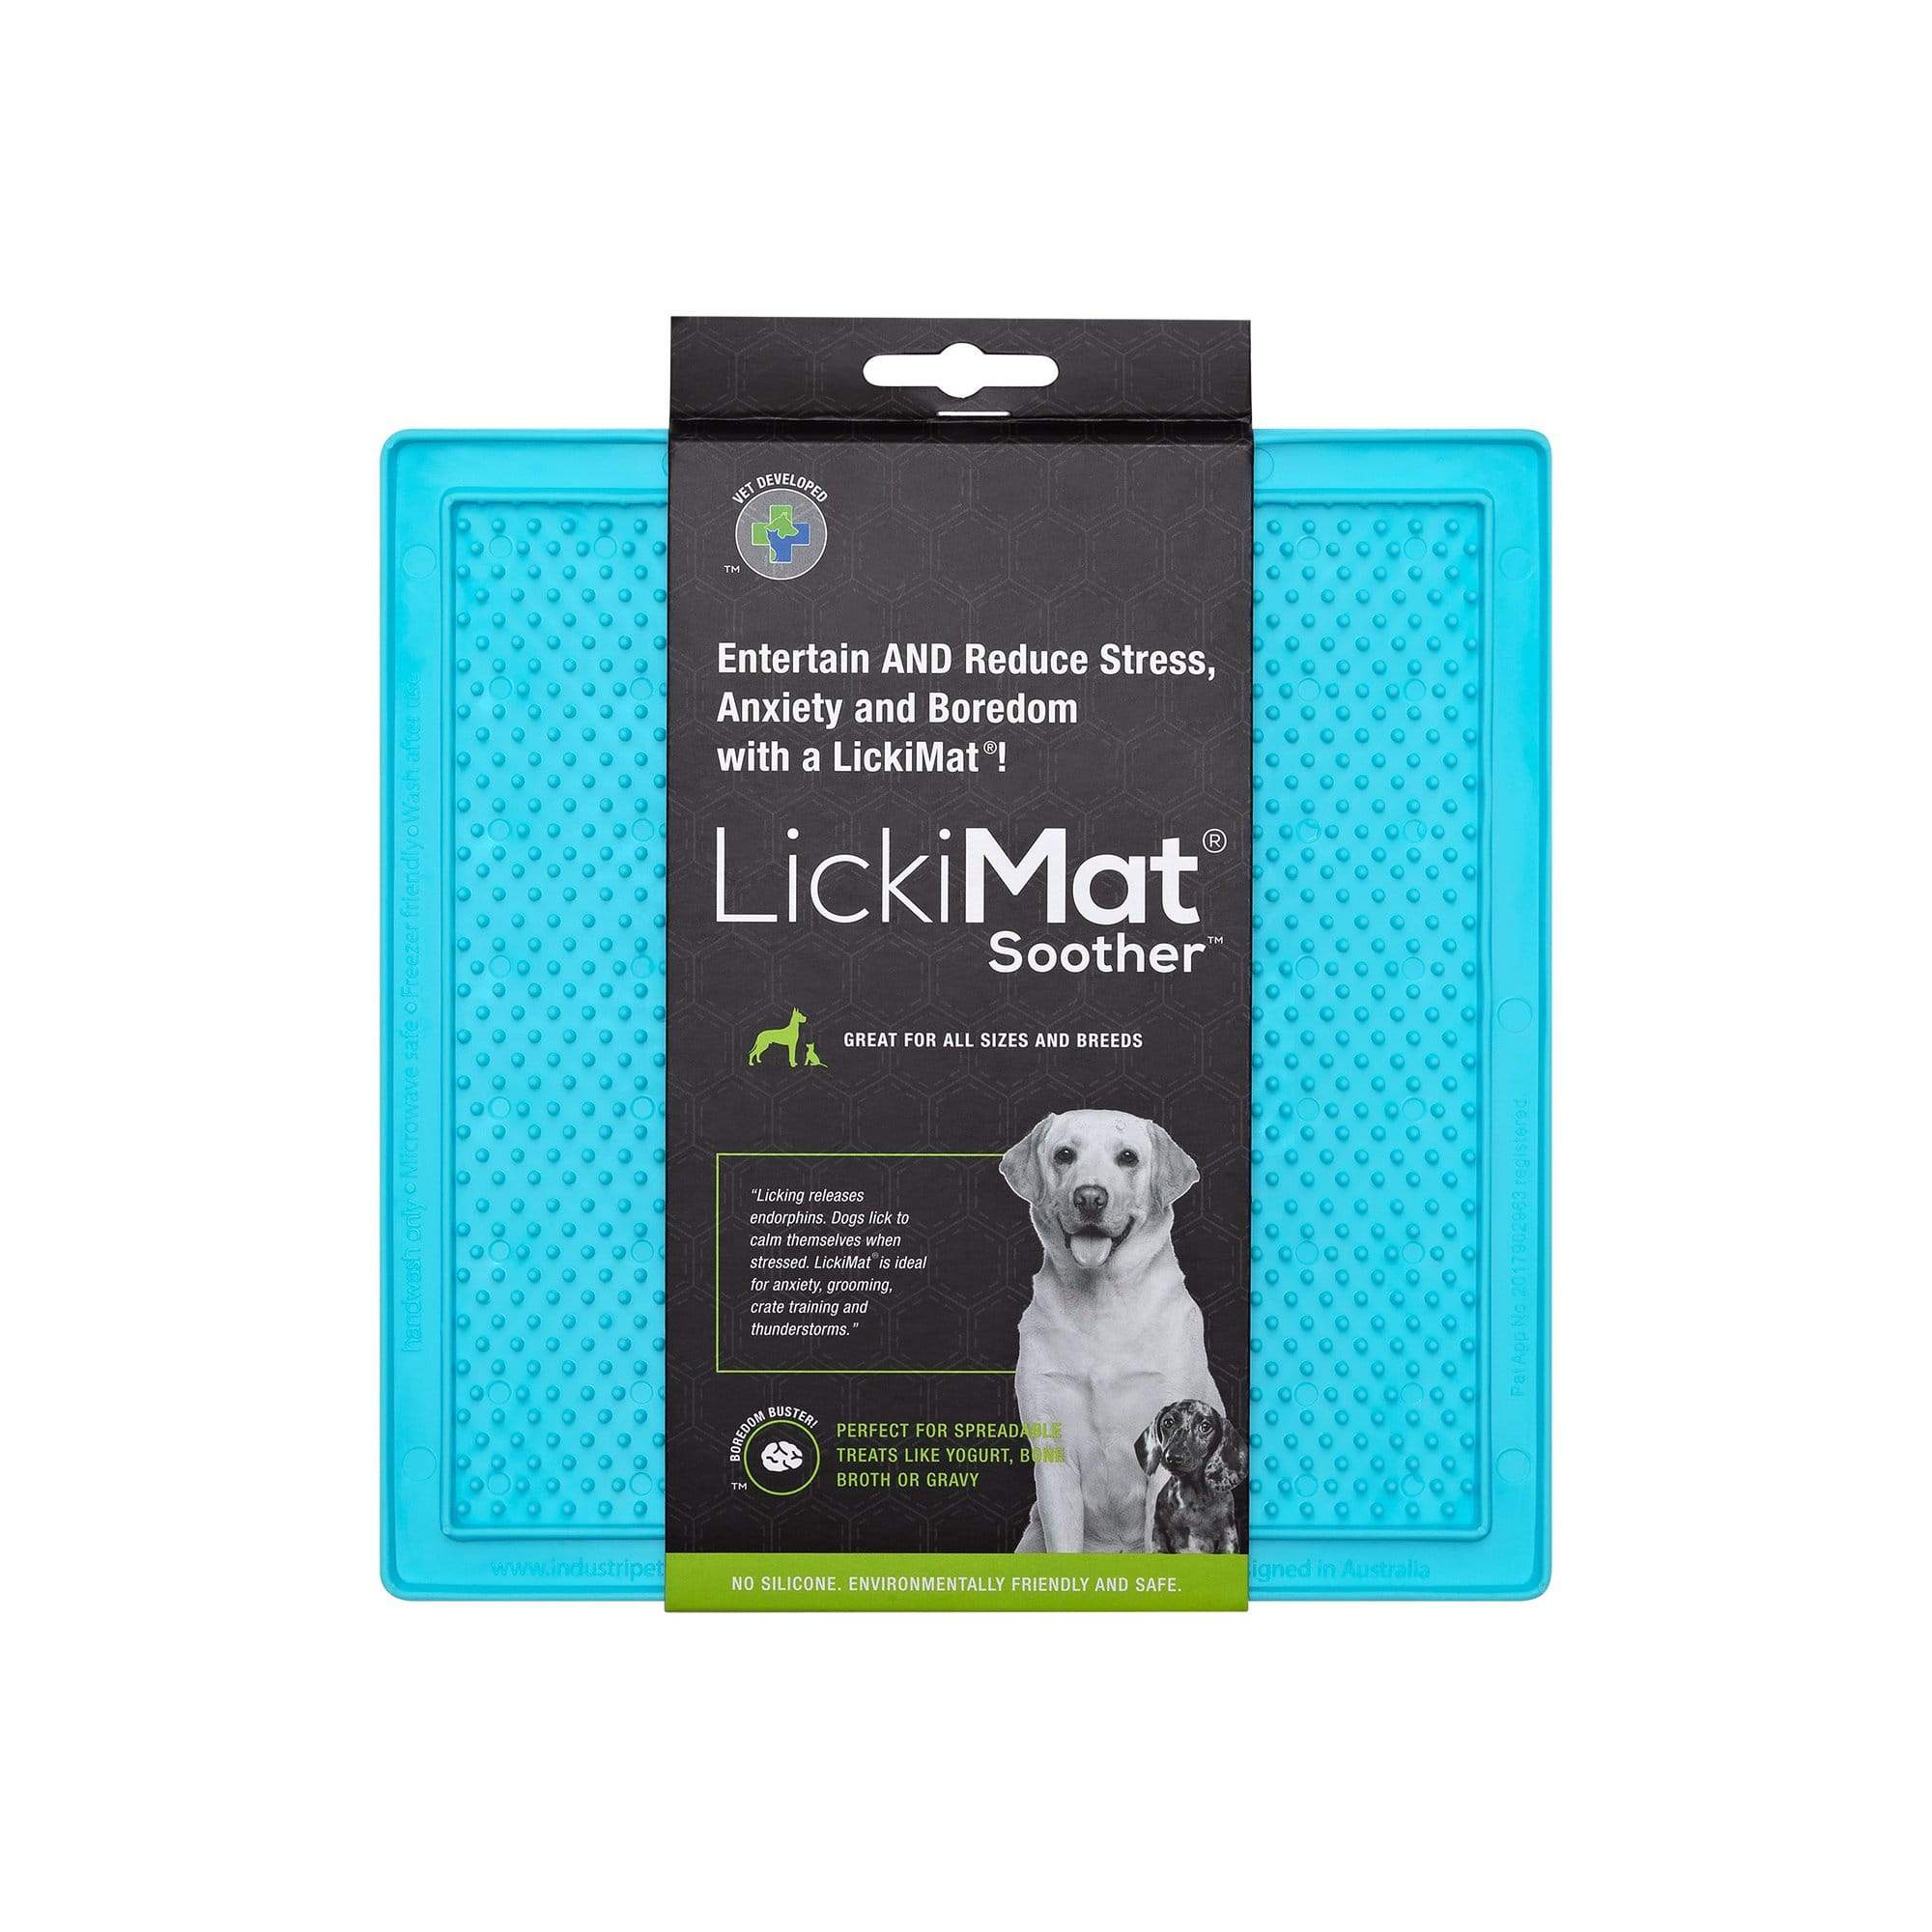 https://cdn.shopify.com/s/files/1/1733/0973/products/lickimat-pet-bowl-lickimat-classic-soother-slow-feed-licking-mat-for-dogs-cats-28436506640583.jpg?v=1635133869